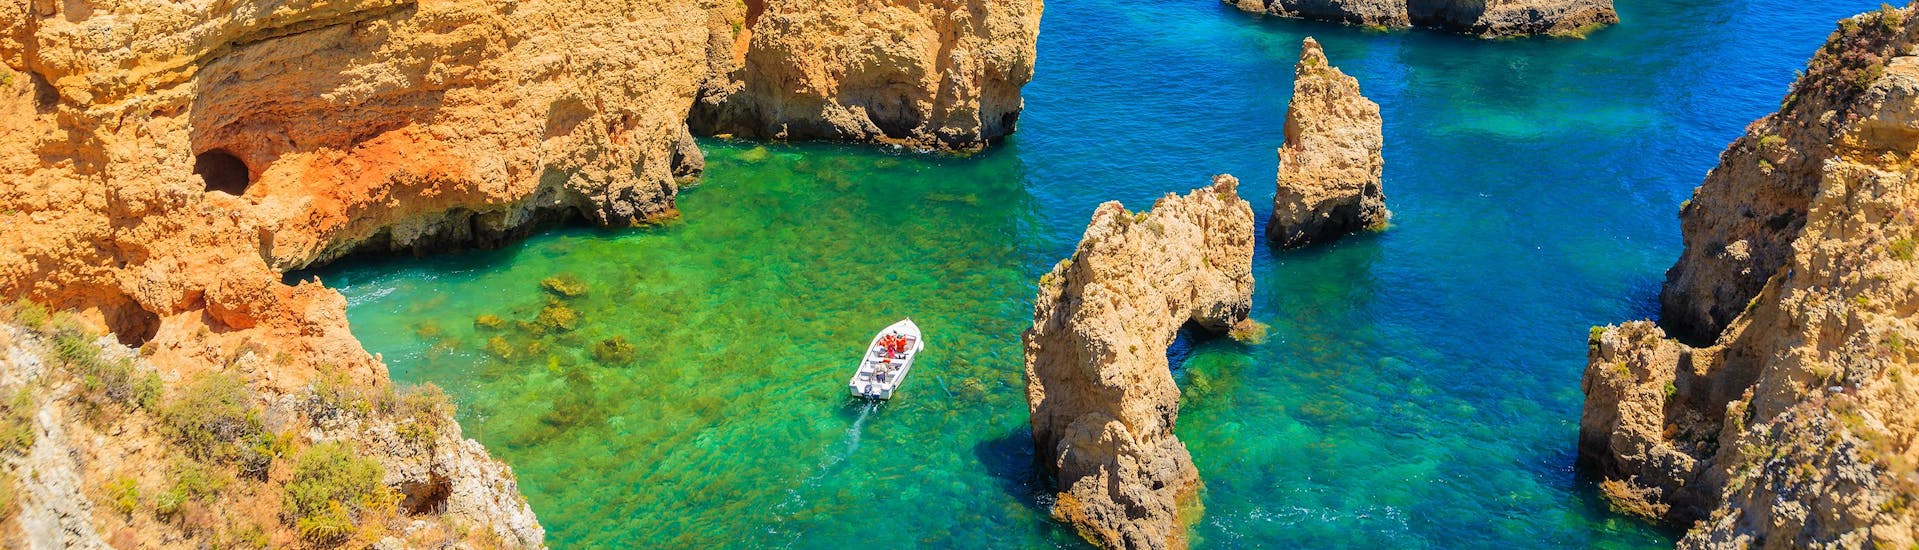 A view of the famous rocks of Ponta da Piedade in Portugal with a number of boat trip operators navigating their boats along the coast.